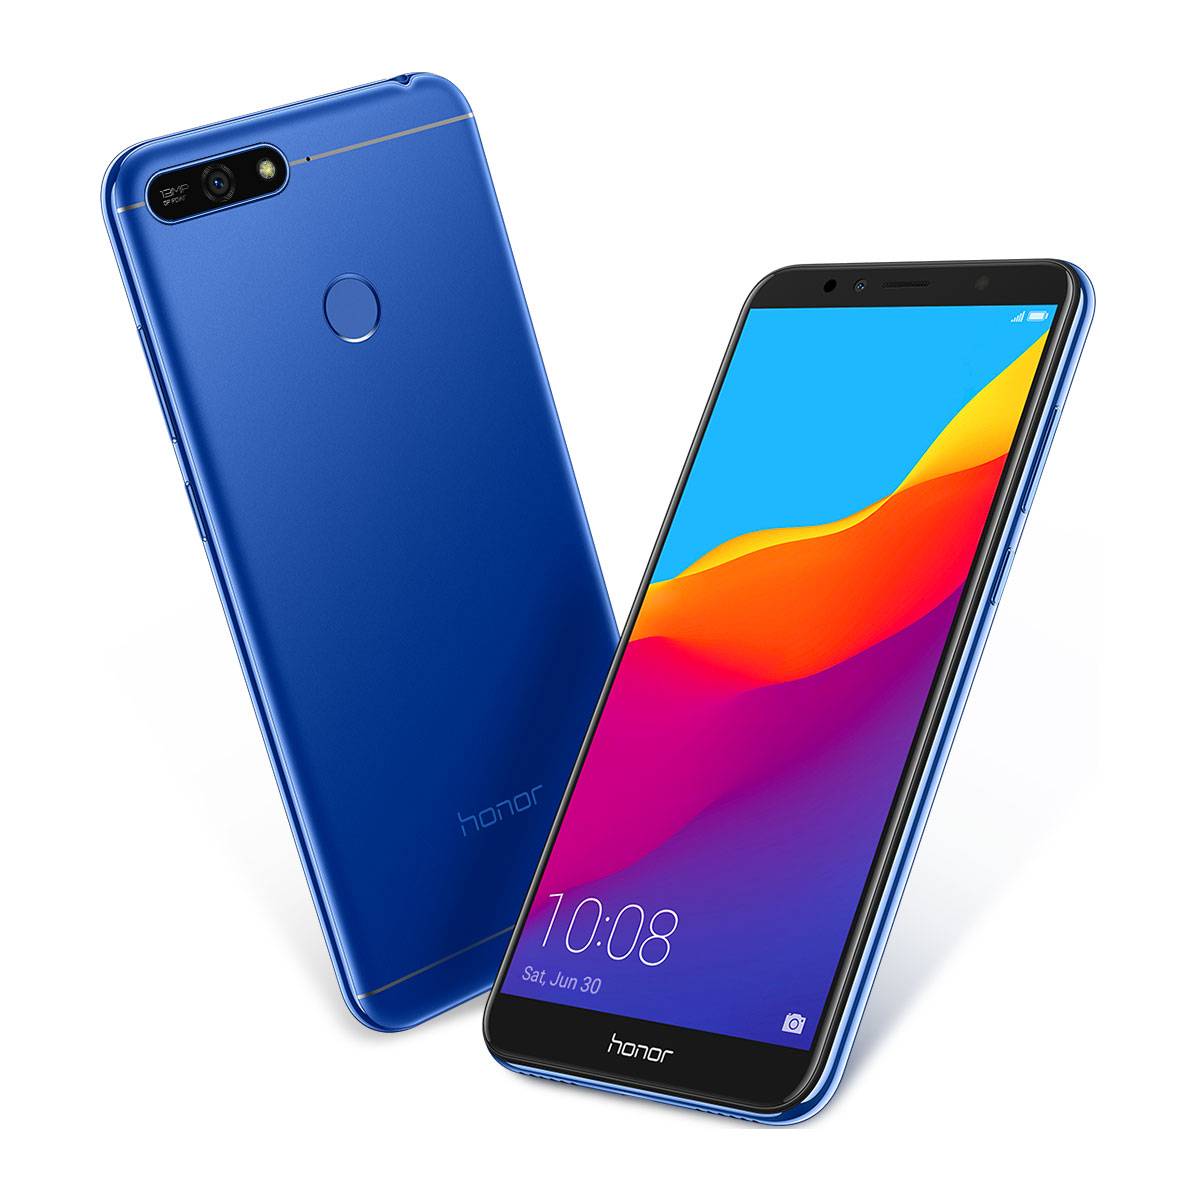 Honor c pro. Huawei Honor 7a Pro. Смартфон Huawei Honor 7a. Смартфон Huawei Honor 7a Pro. Смартфон Хуавей хонор 7.